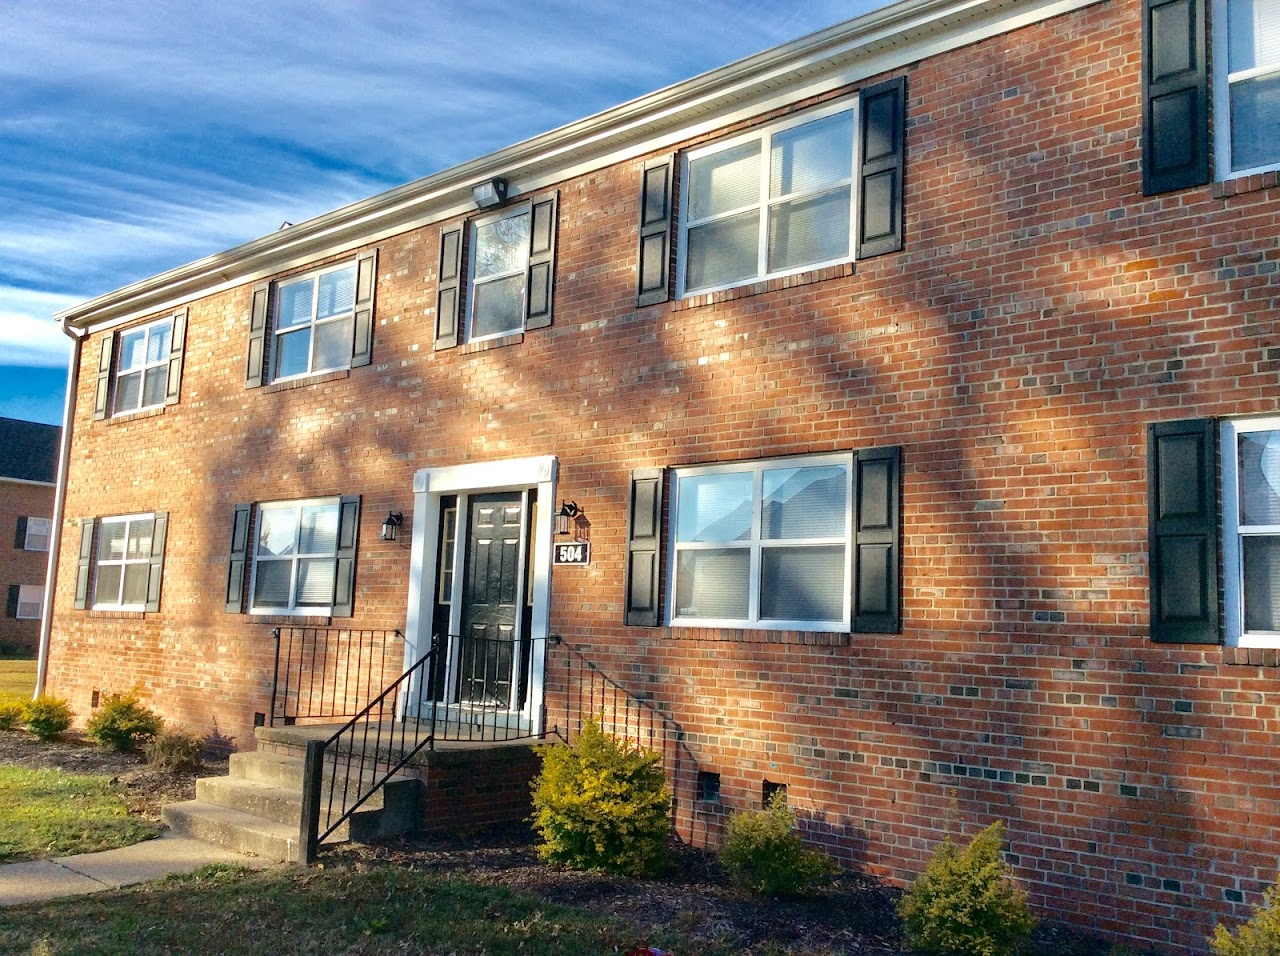 Photo of ARBOR POINTE. Affordable housing located at 502 GRANTHAM RD NORFOLK, VA 23505